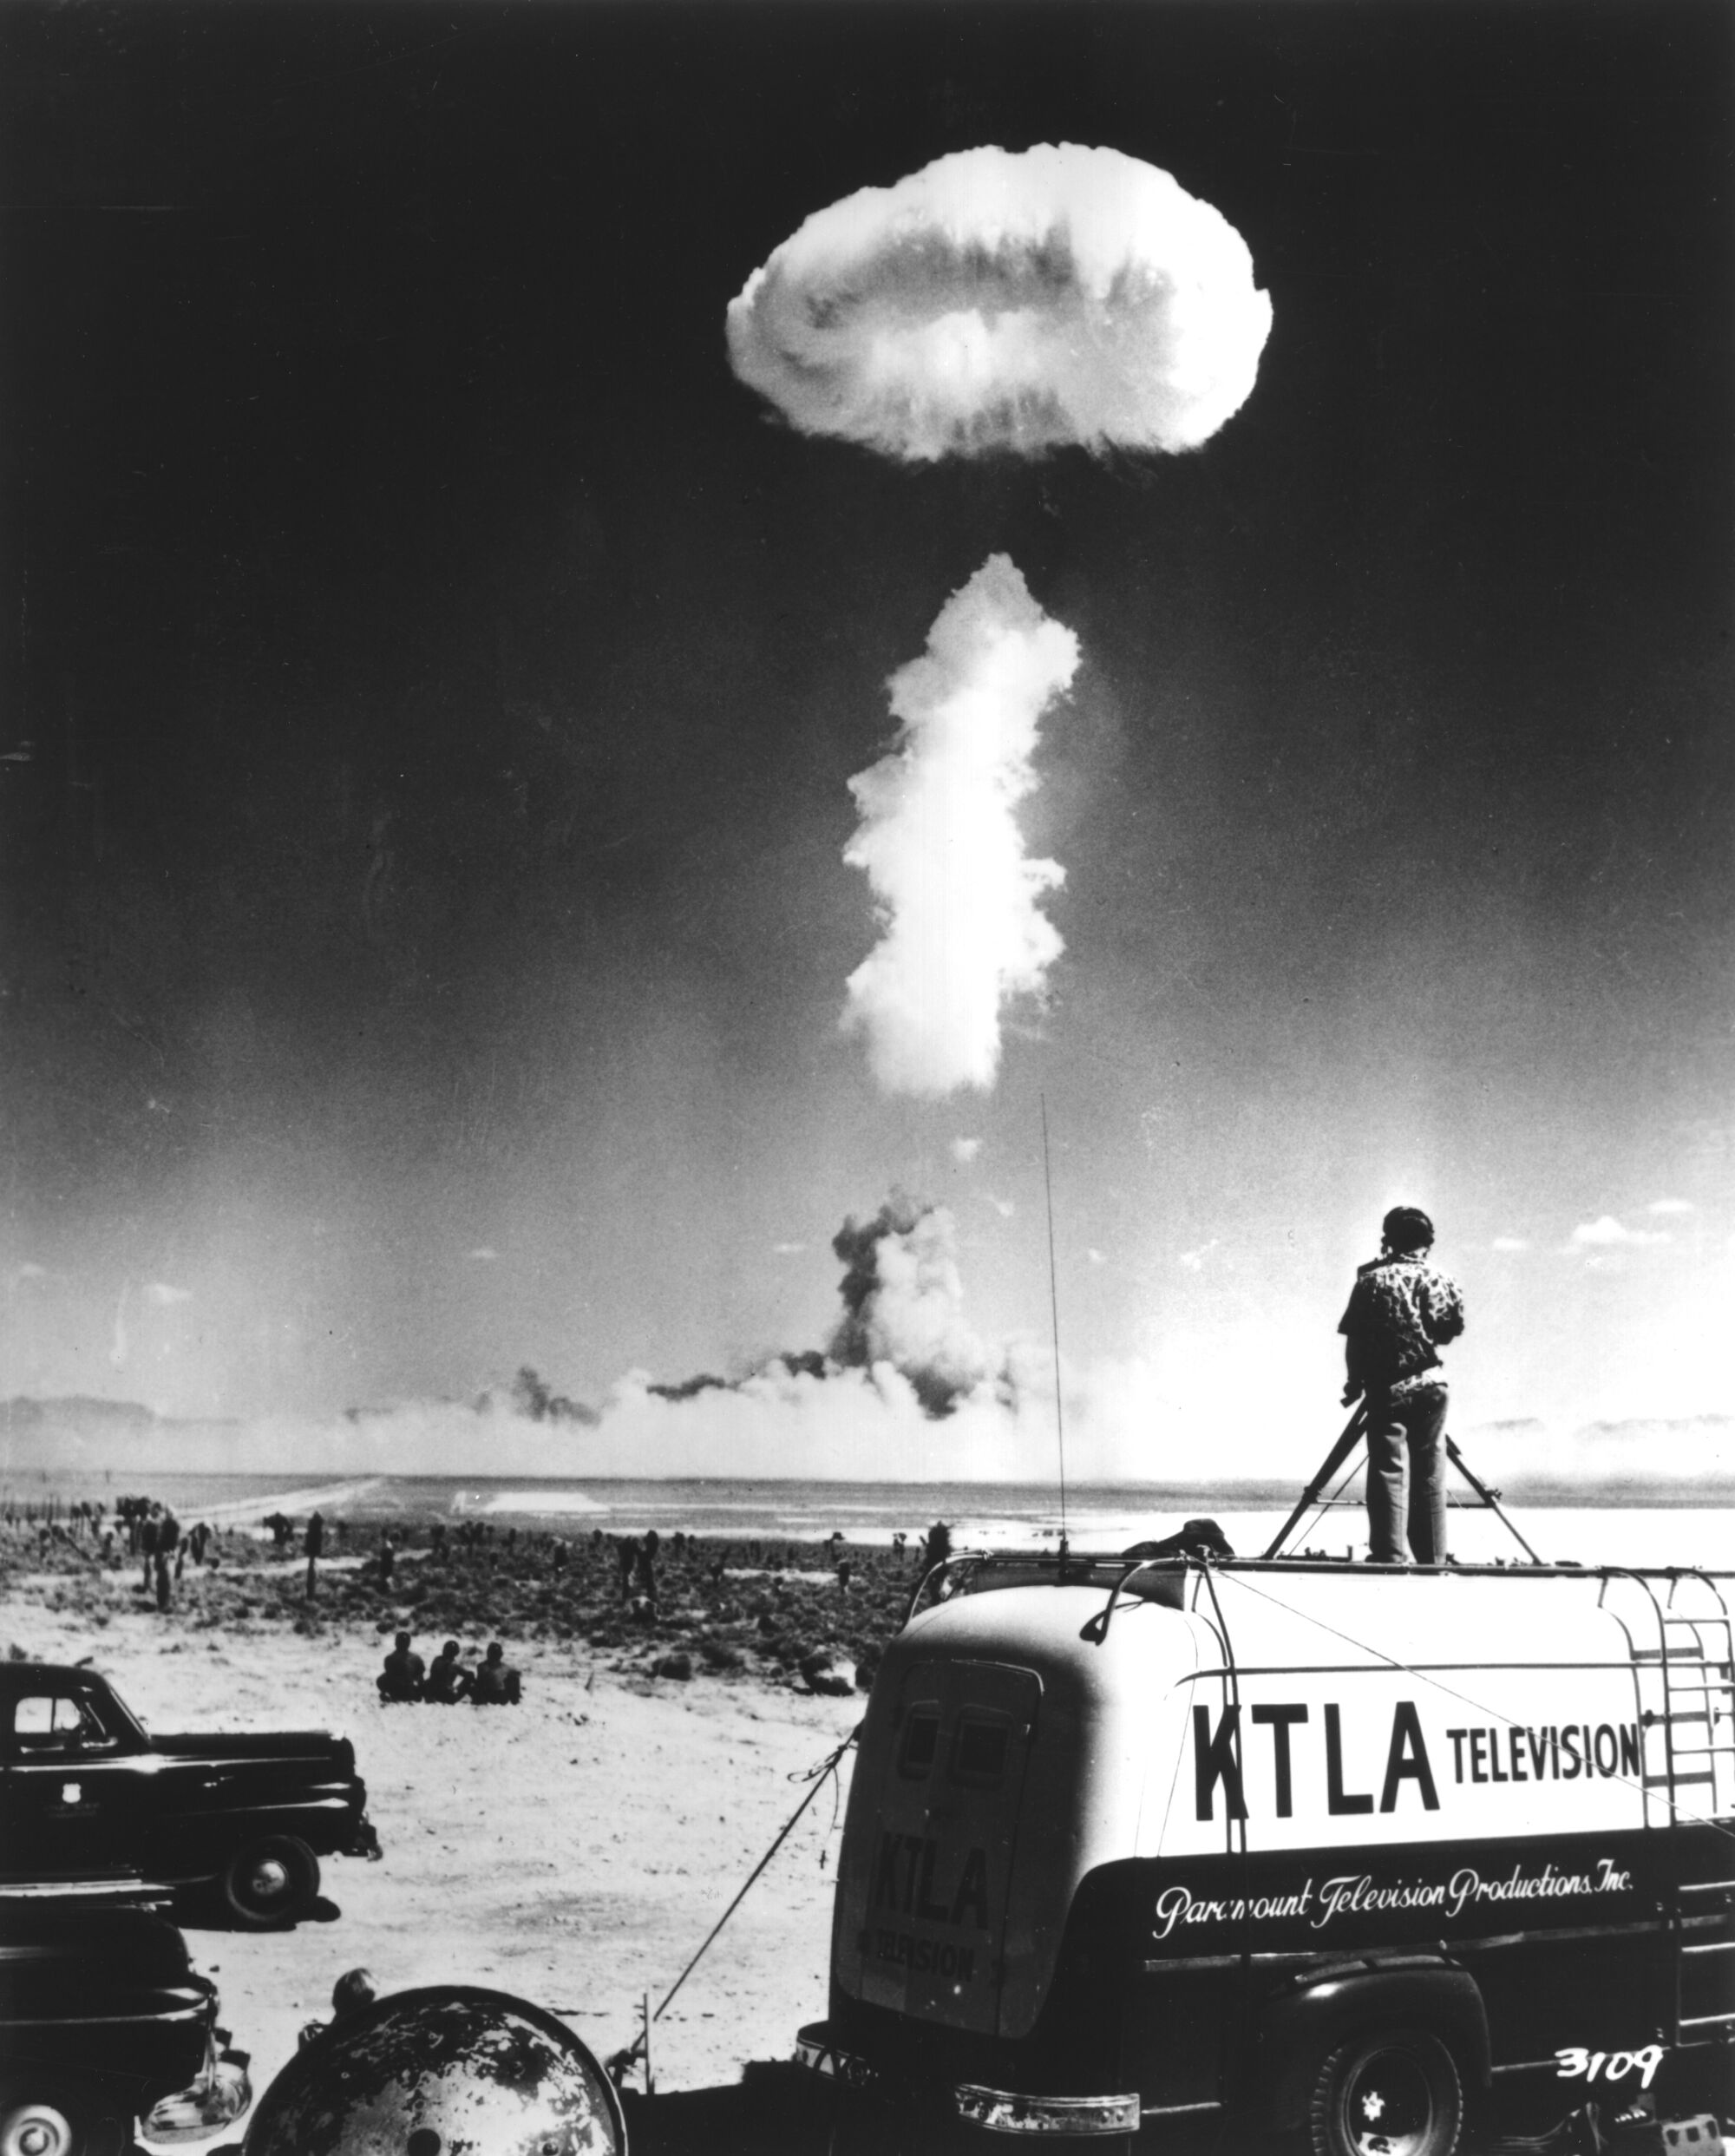 KTLA made history with its 1952 live broadcast an atomic bomb blast, which was aired by the major networks. 